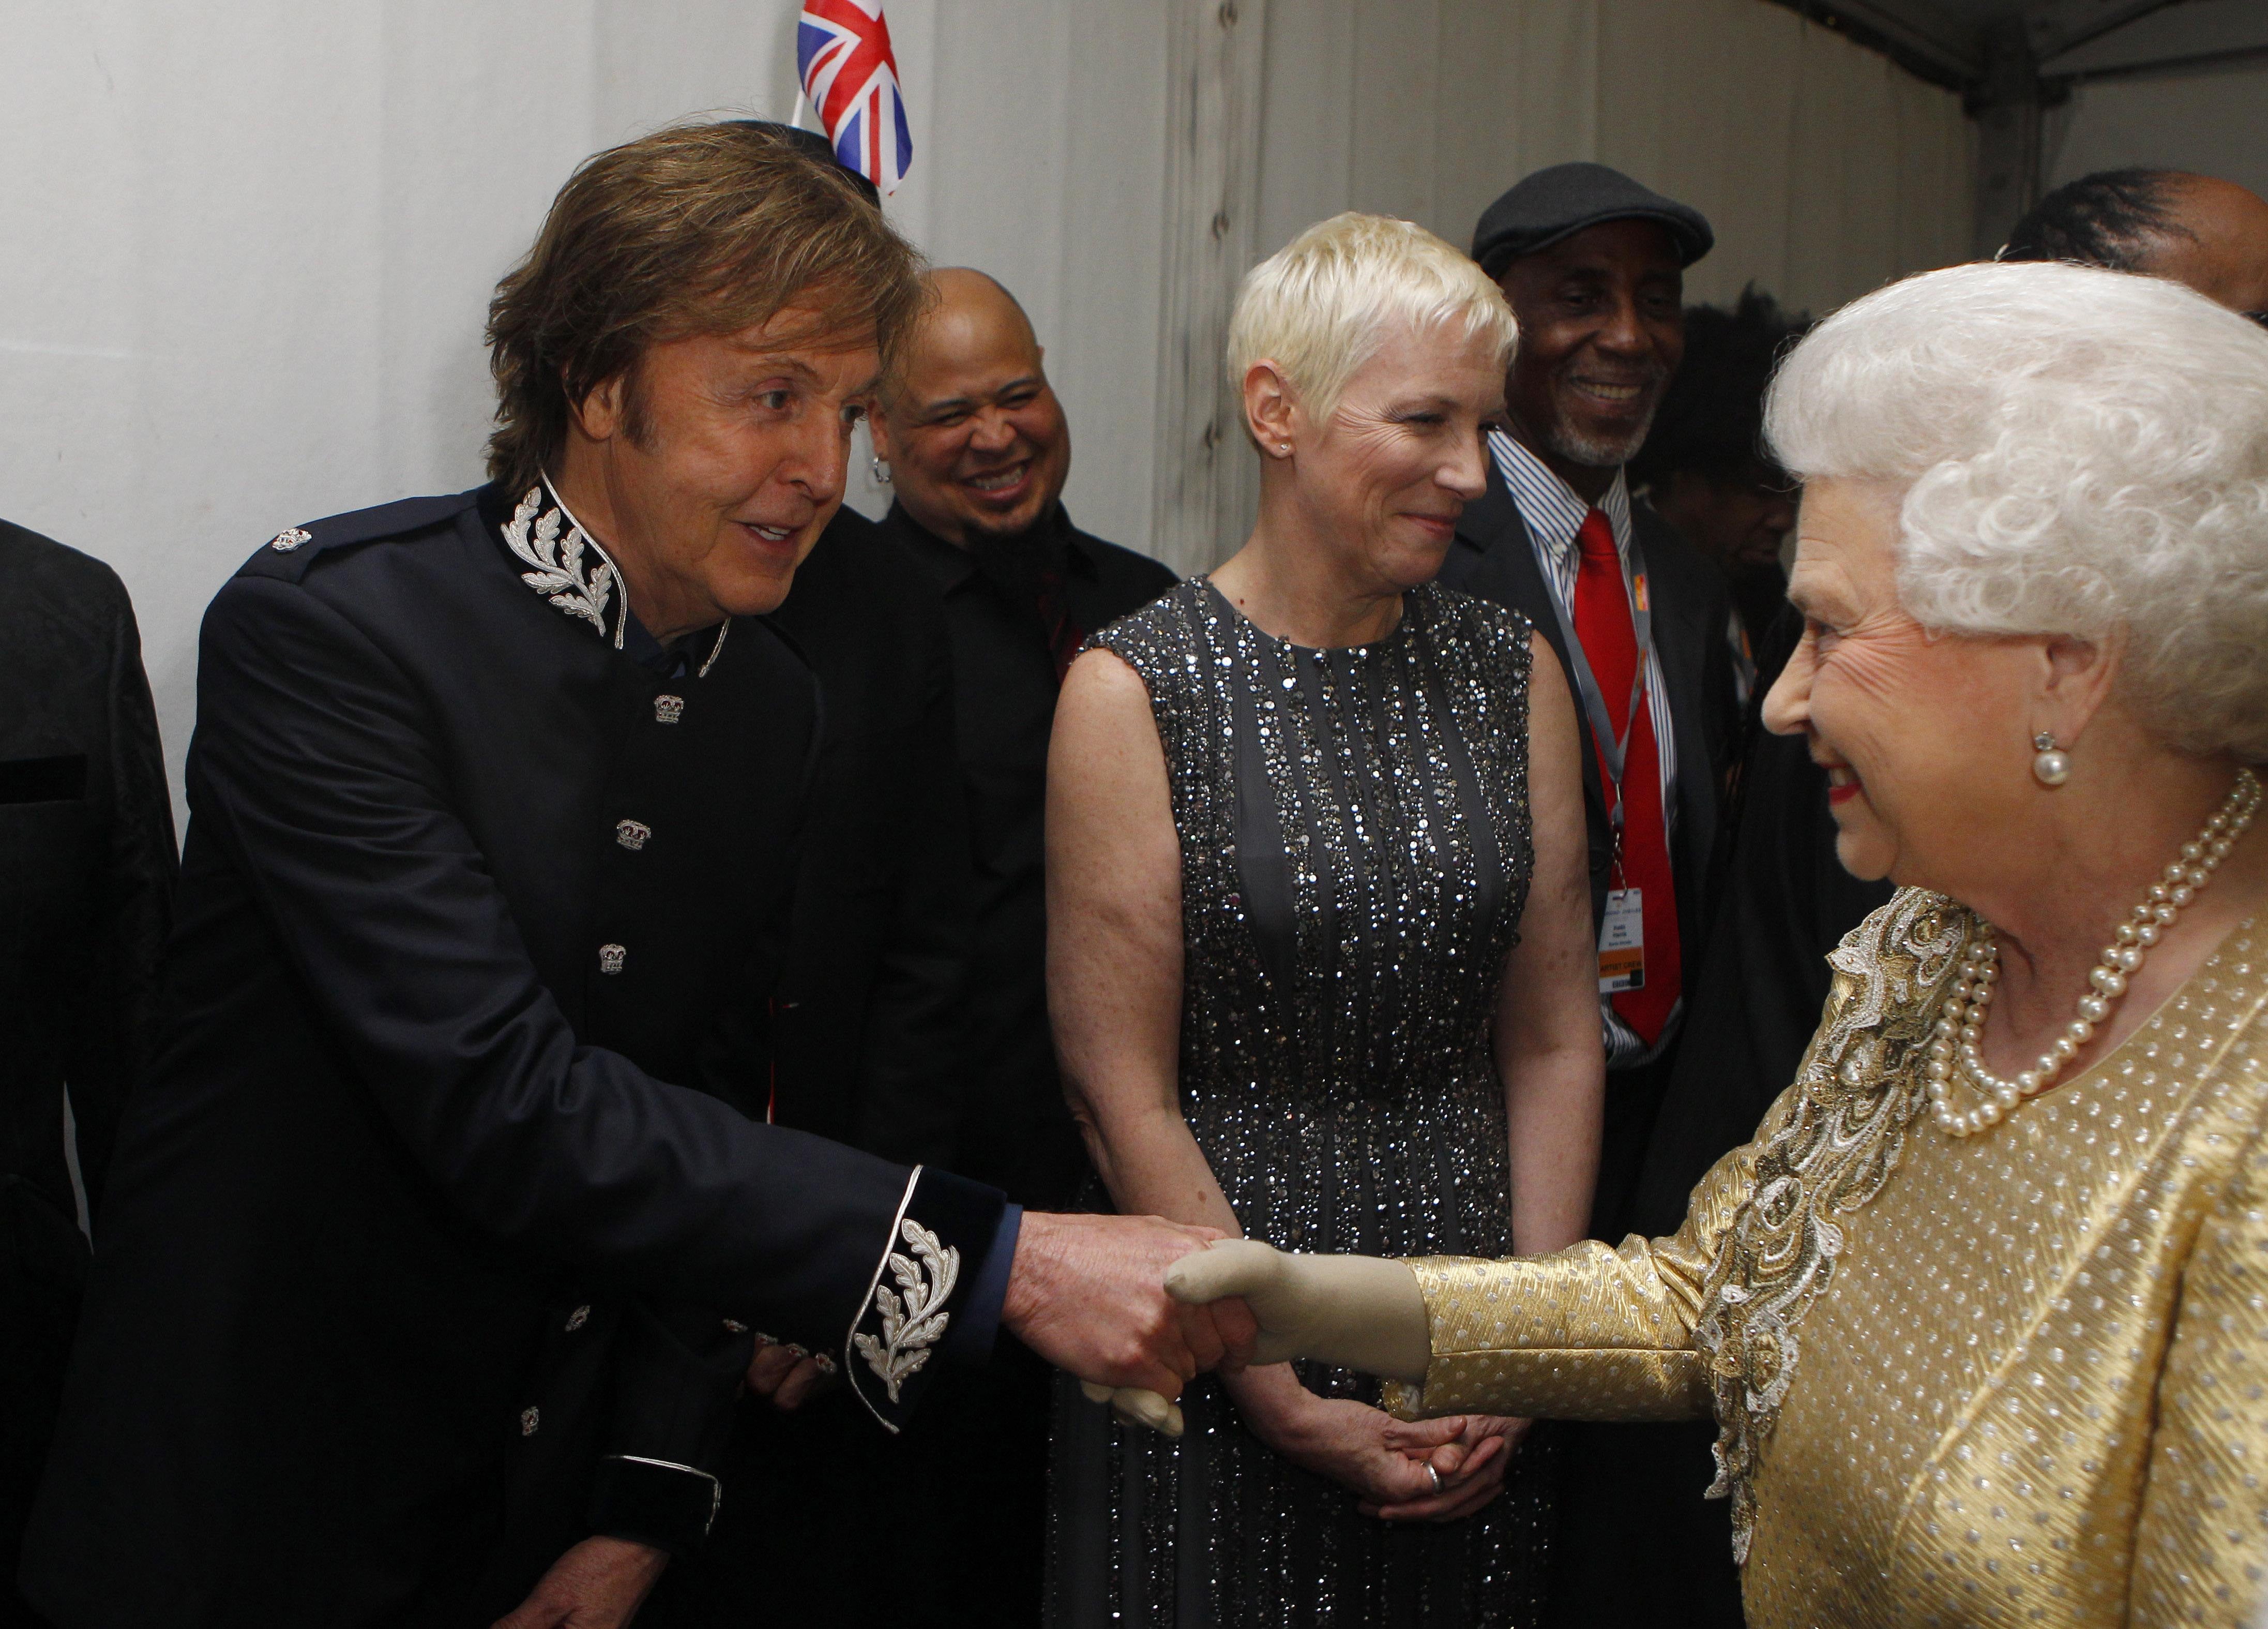 Sir Paul McCartney shares decades of ‘privileged’ interactions with the Queen (Dave Thompson/PA)